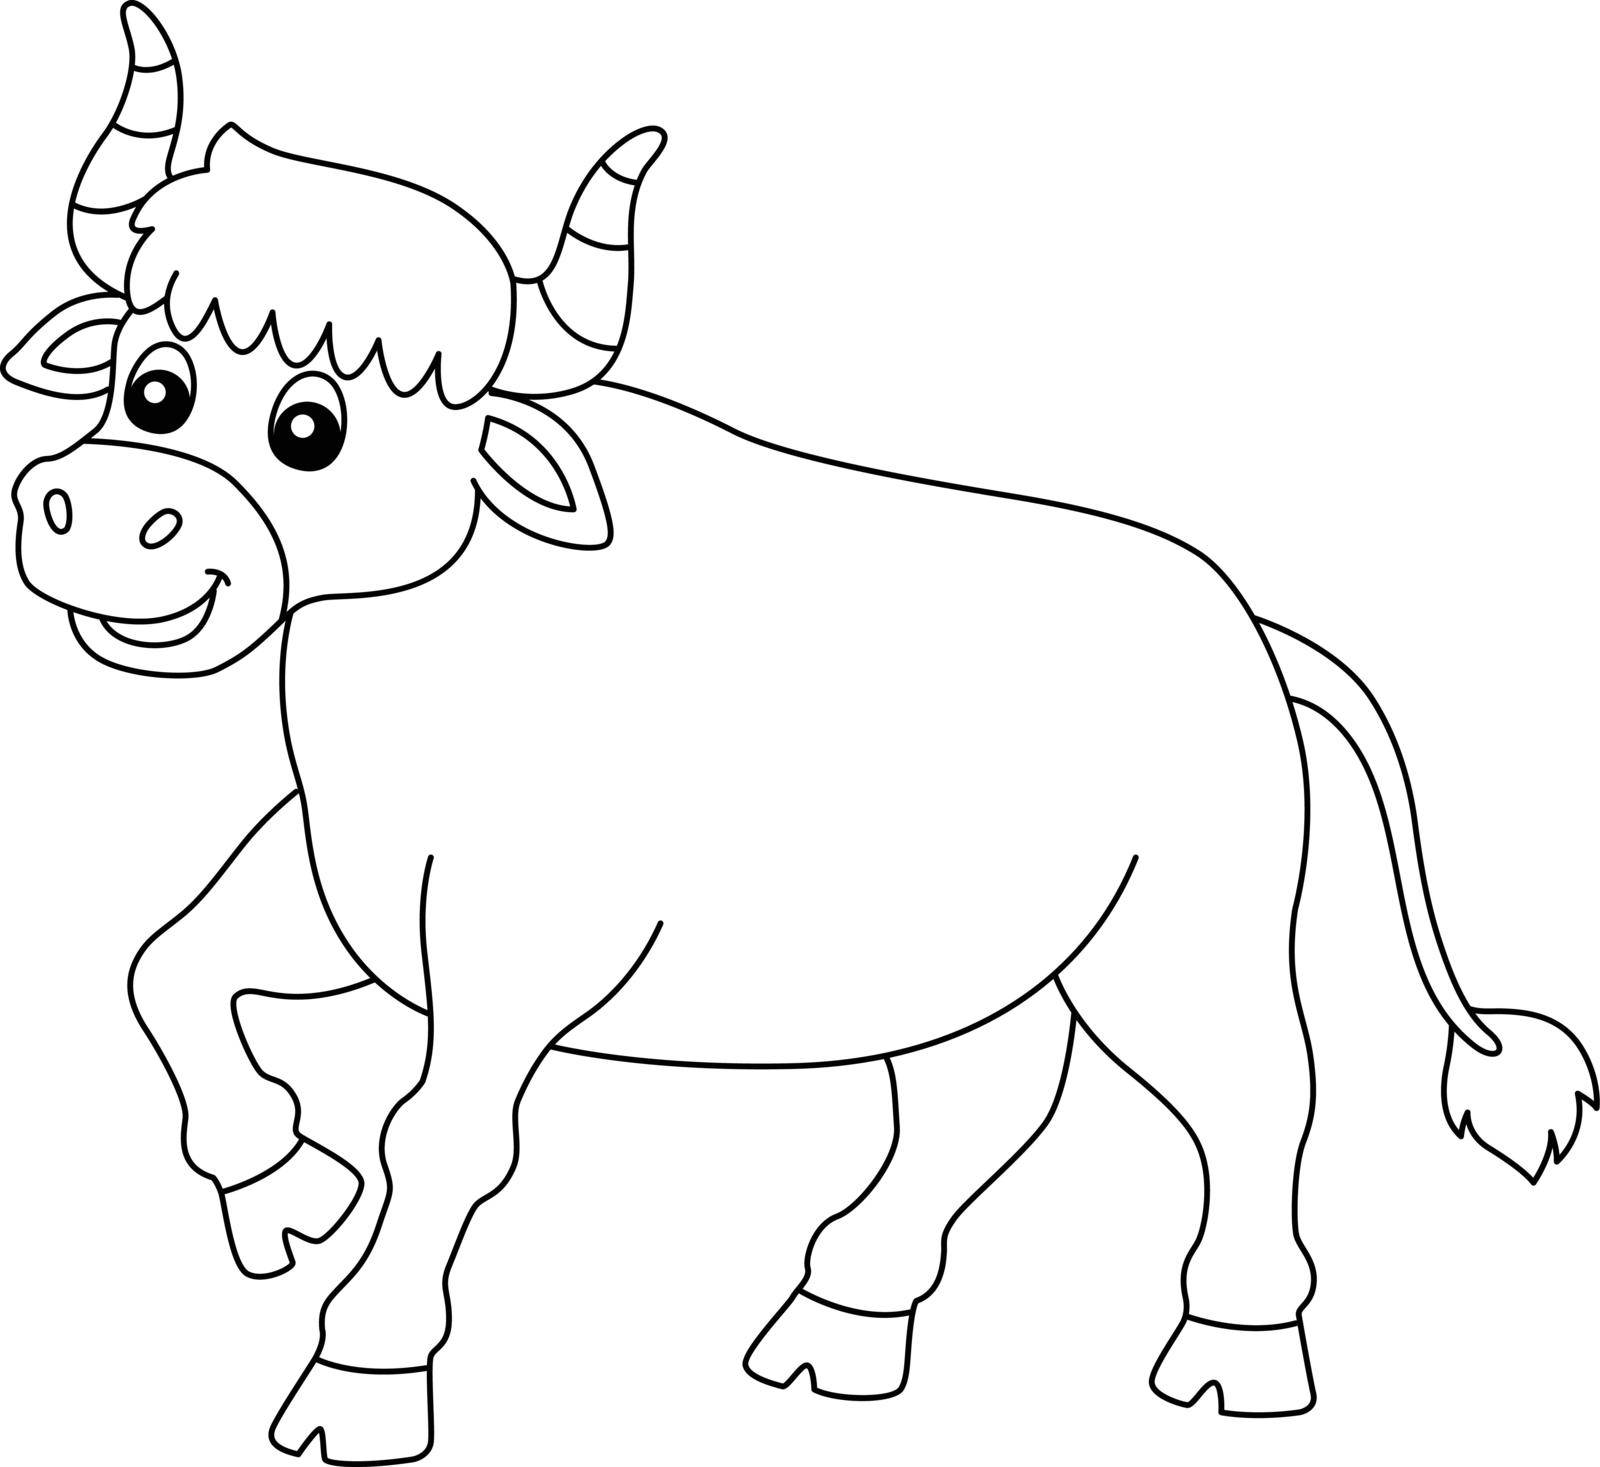 A cute and funny coloring page of an ox farm animal. Provides hours of coloring fun for children. To color, this page is very easy. Suitable for little kids and toddlers.